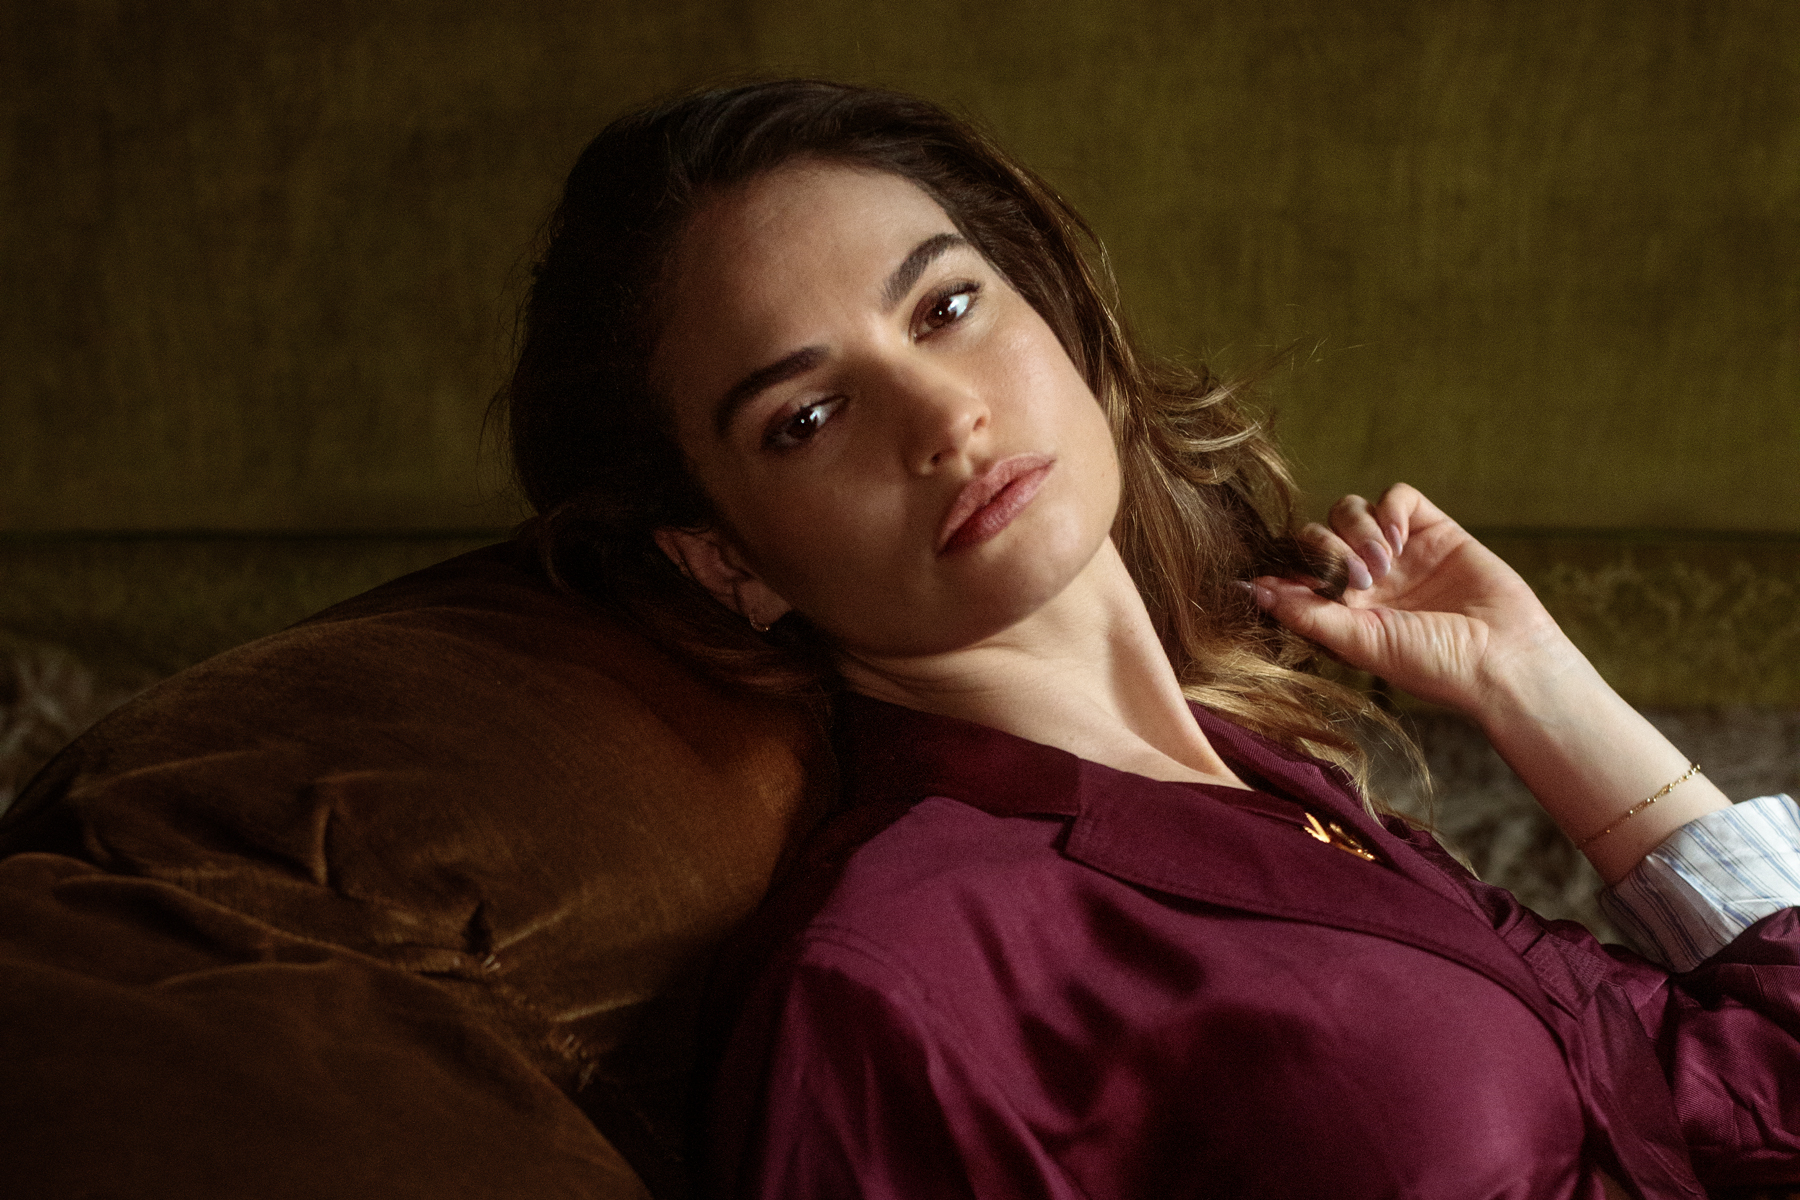 ‘Pam & Tommy’ Star Lily James on Why Playing Anderson Was ‘Personal’